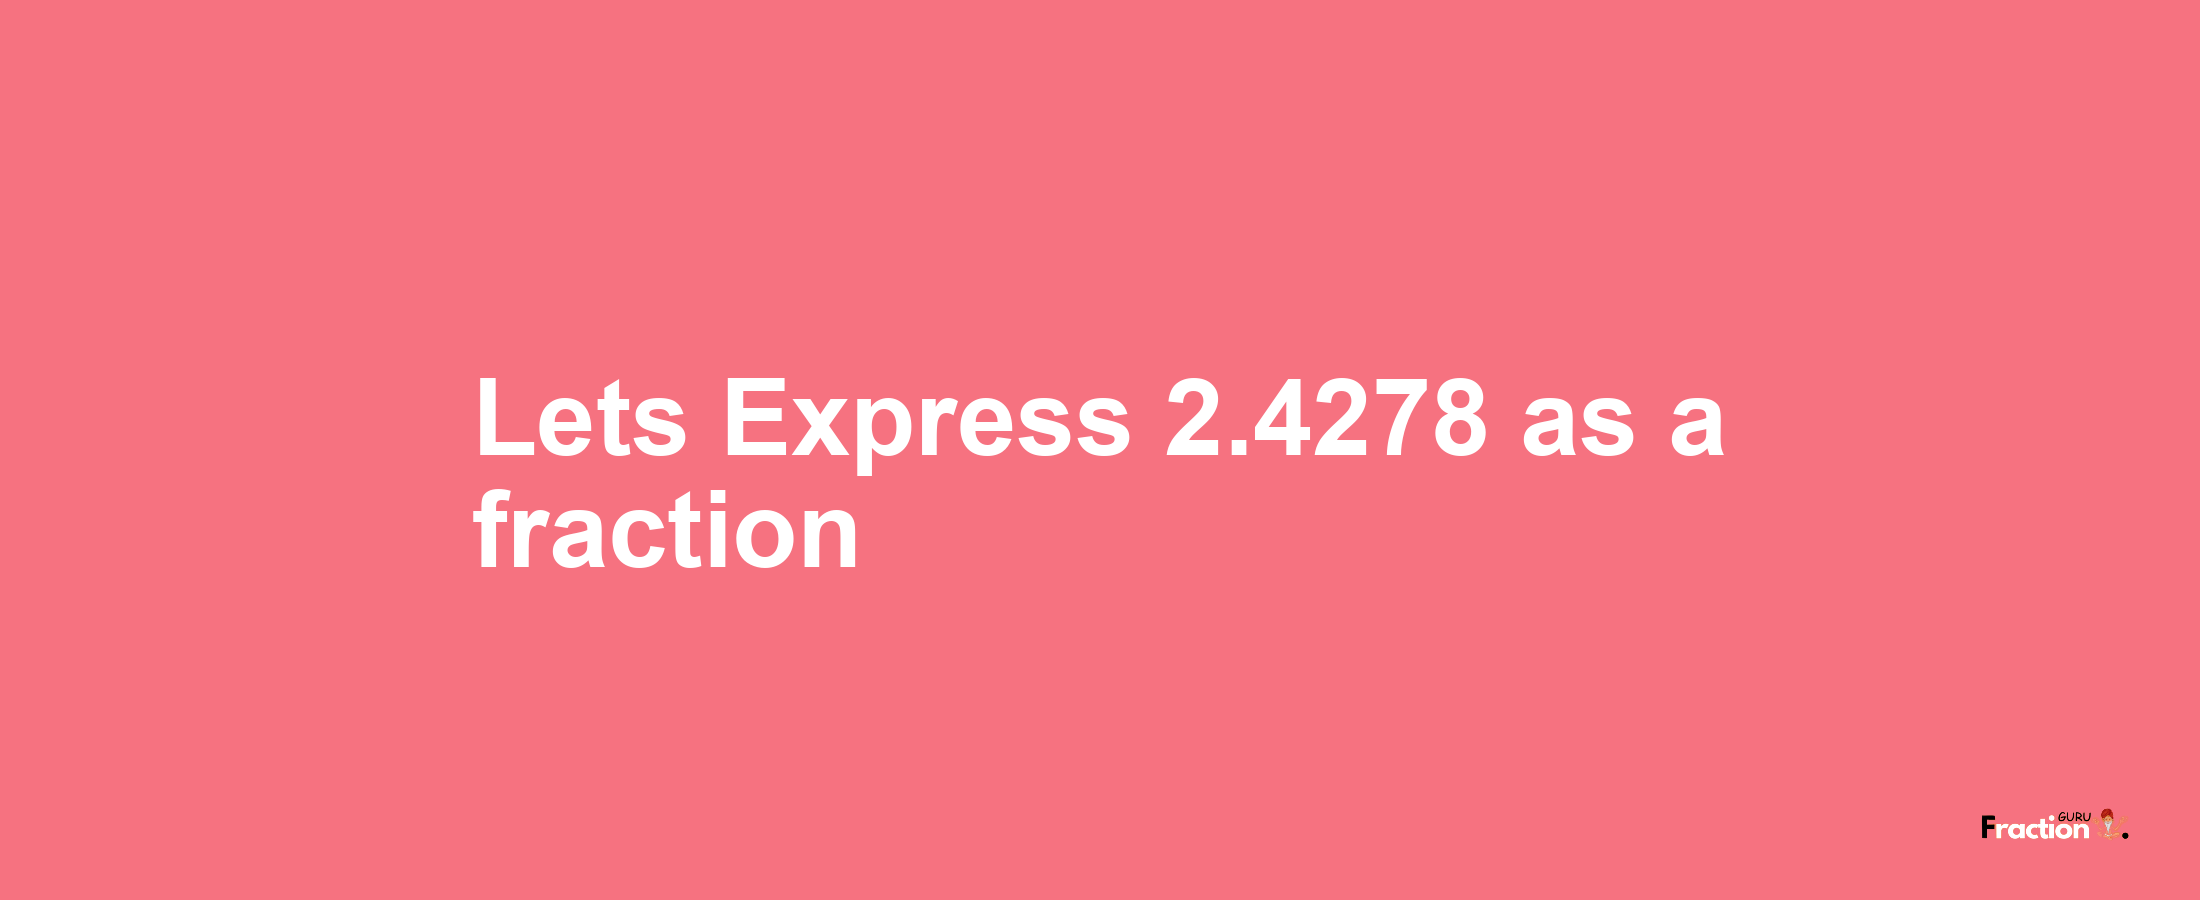 Lets Express 2.4278 as afraction